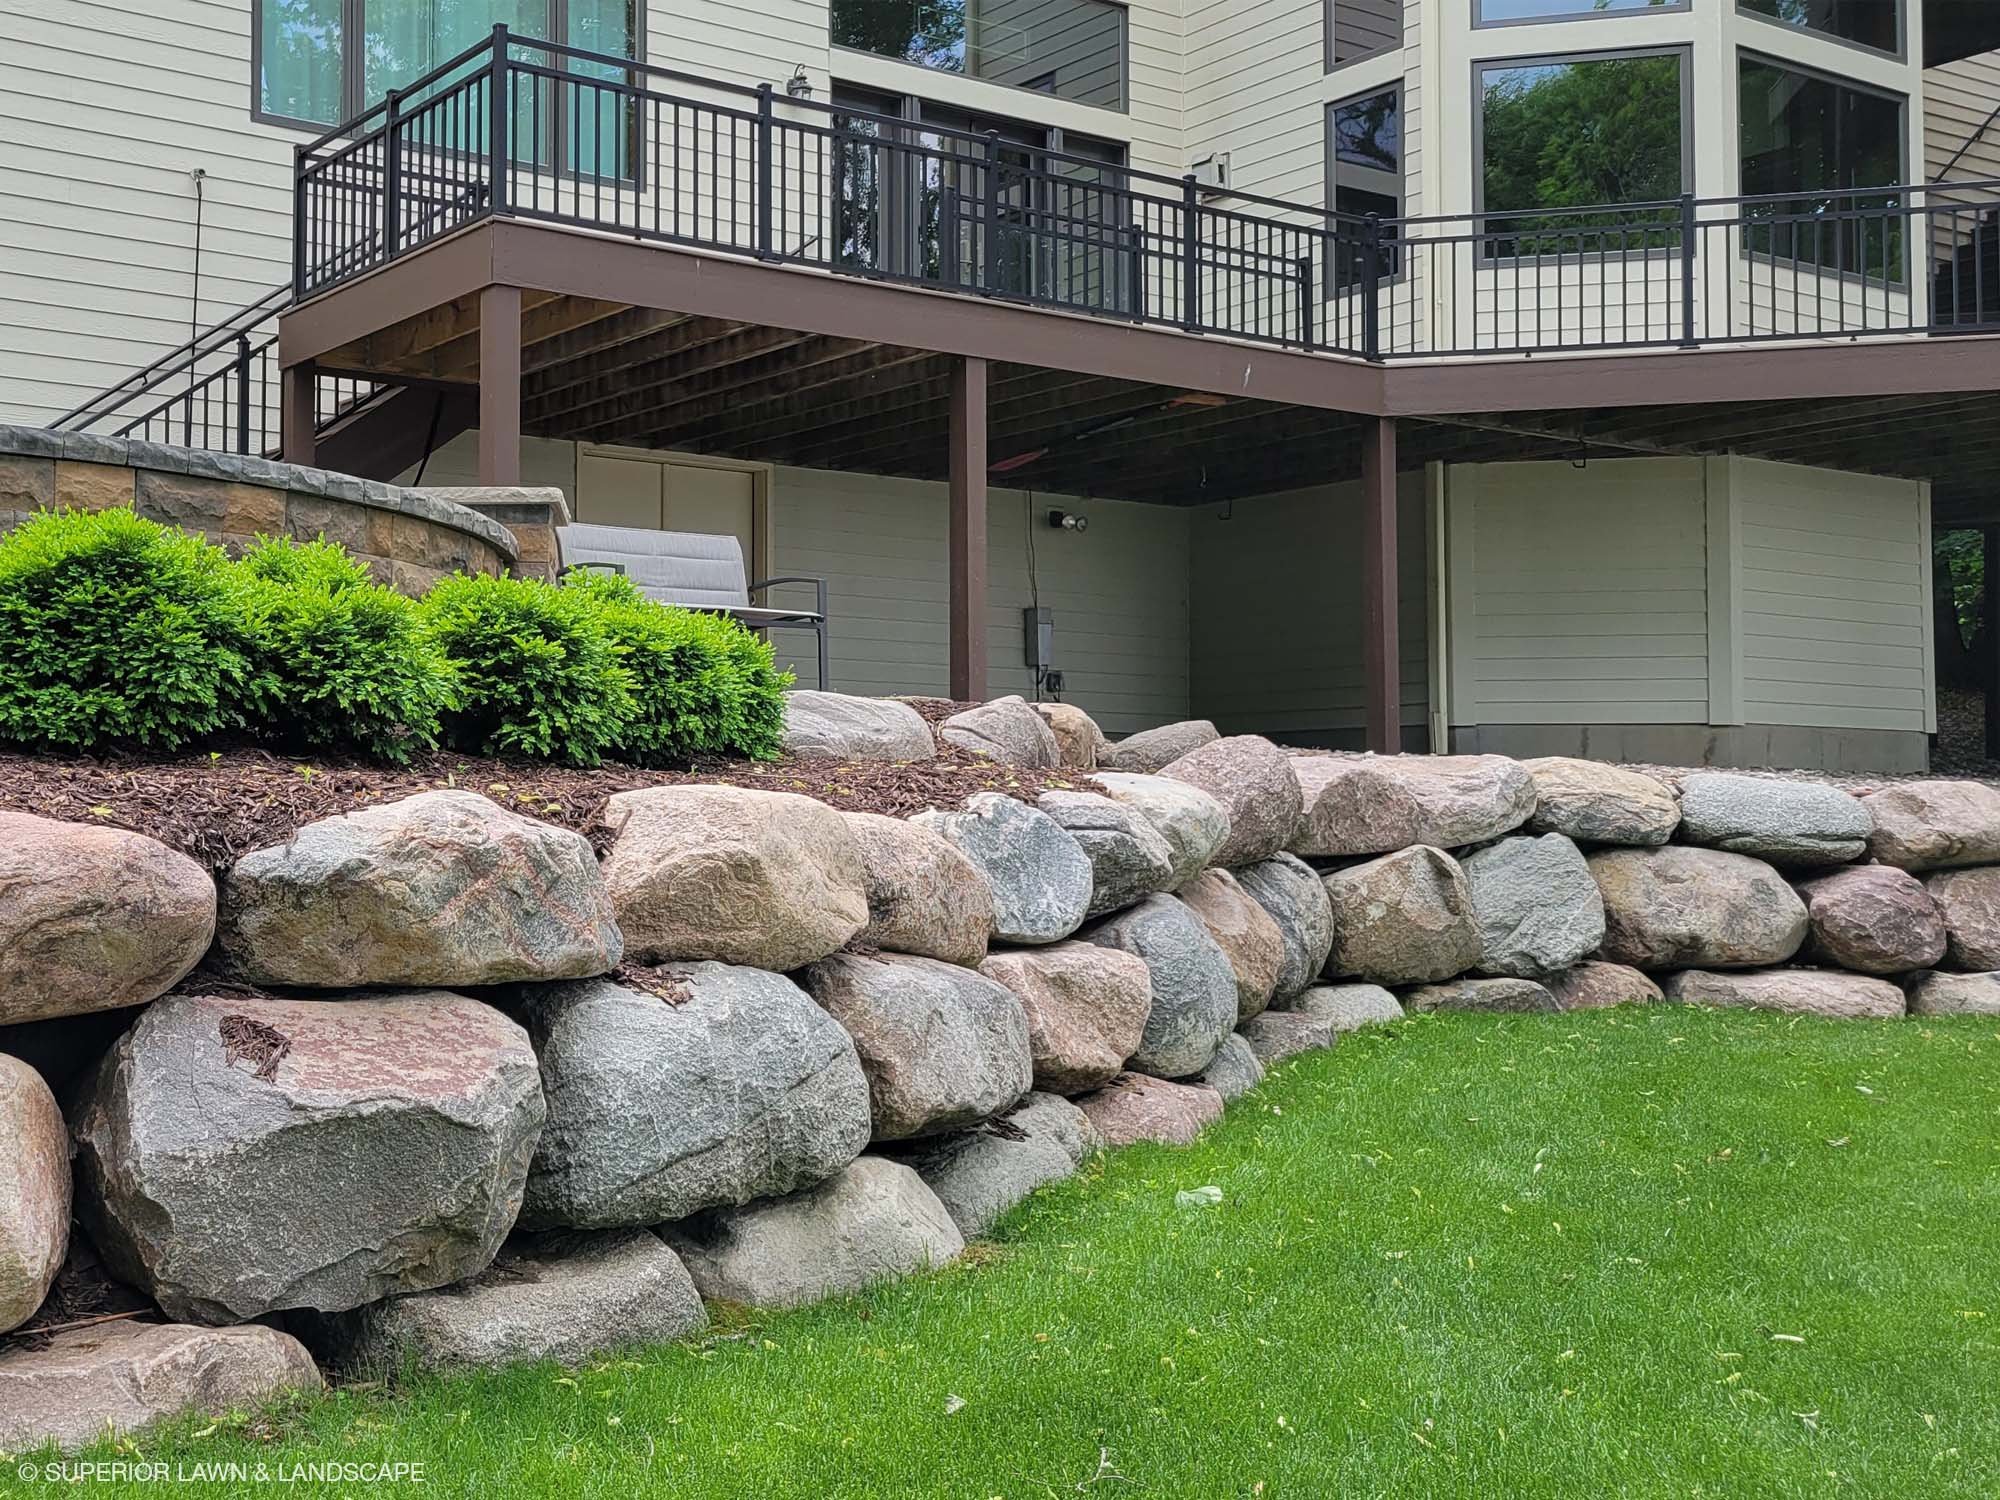 superior-lawn-landscape-retaining-walls-048-boulders-and-grass.jpg